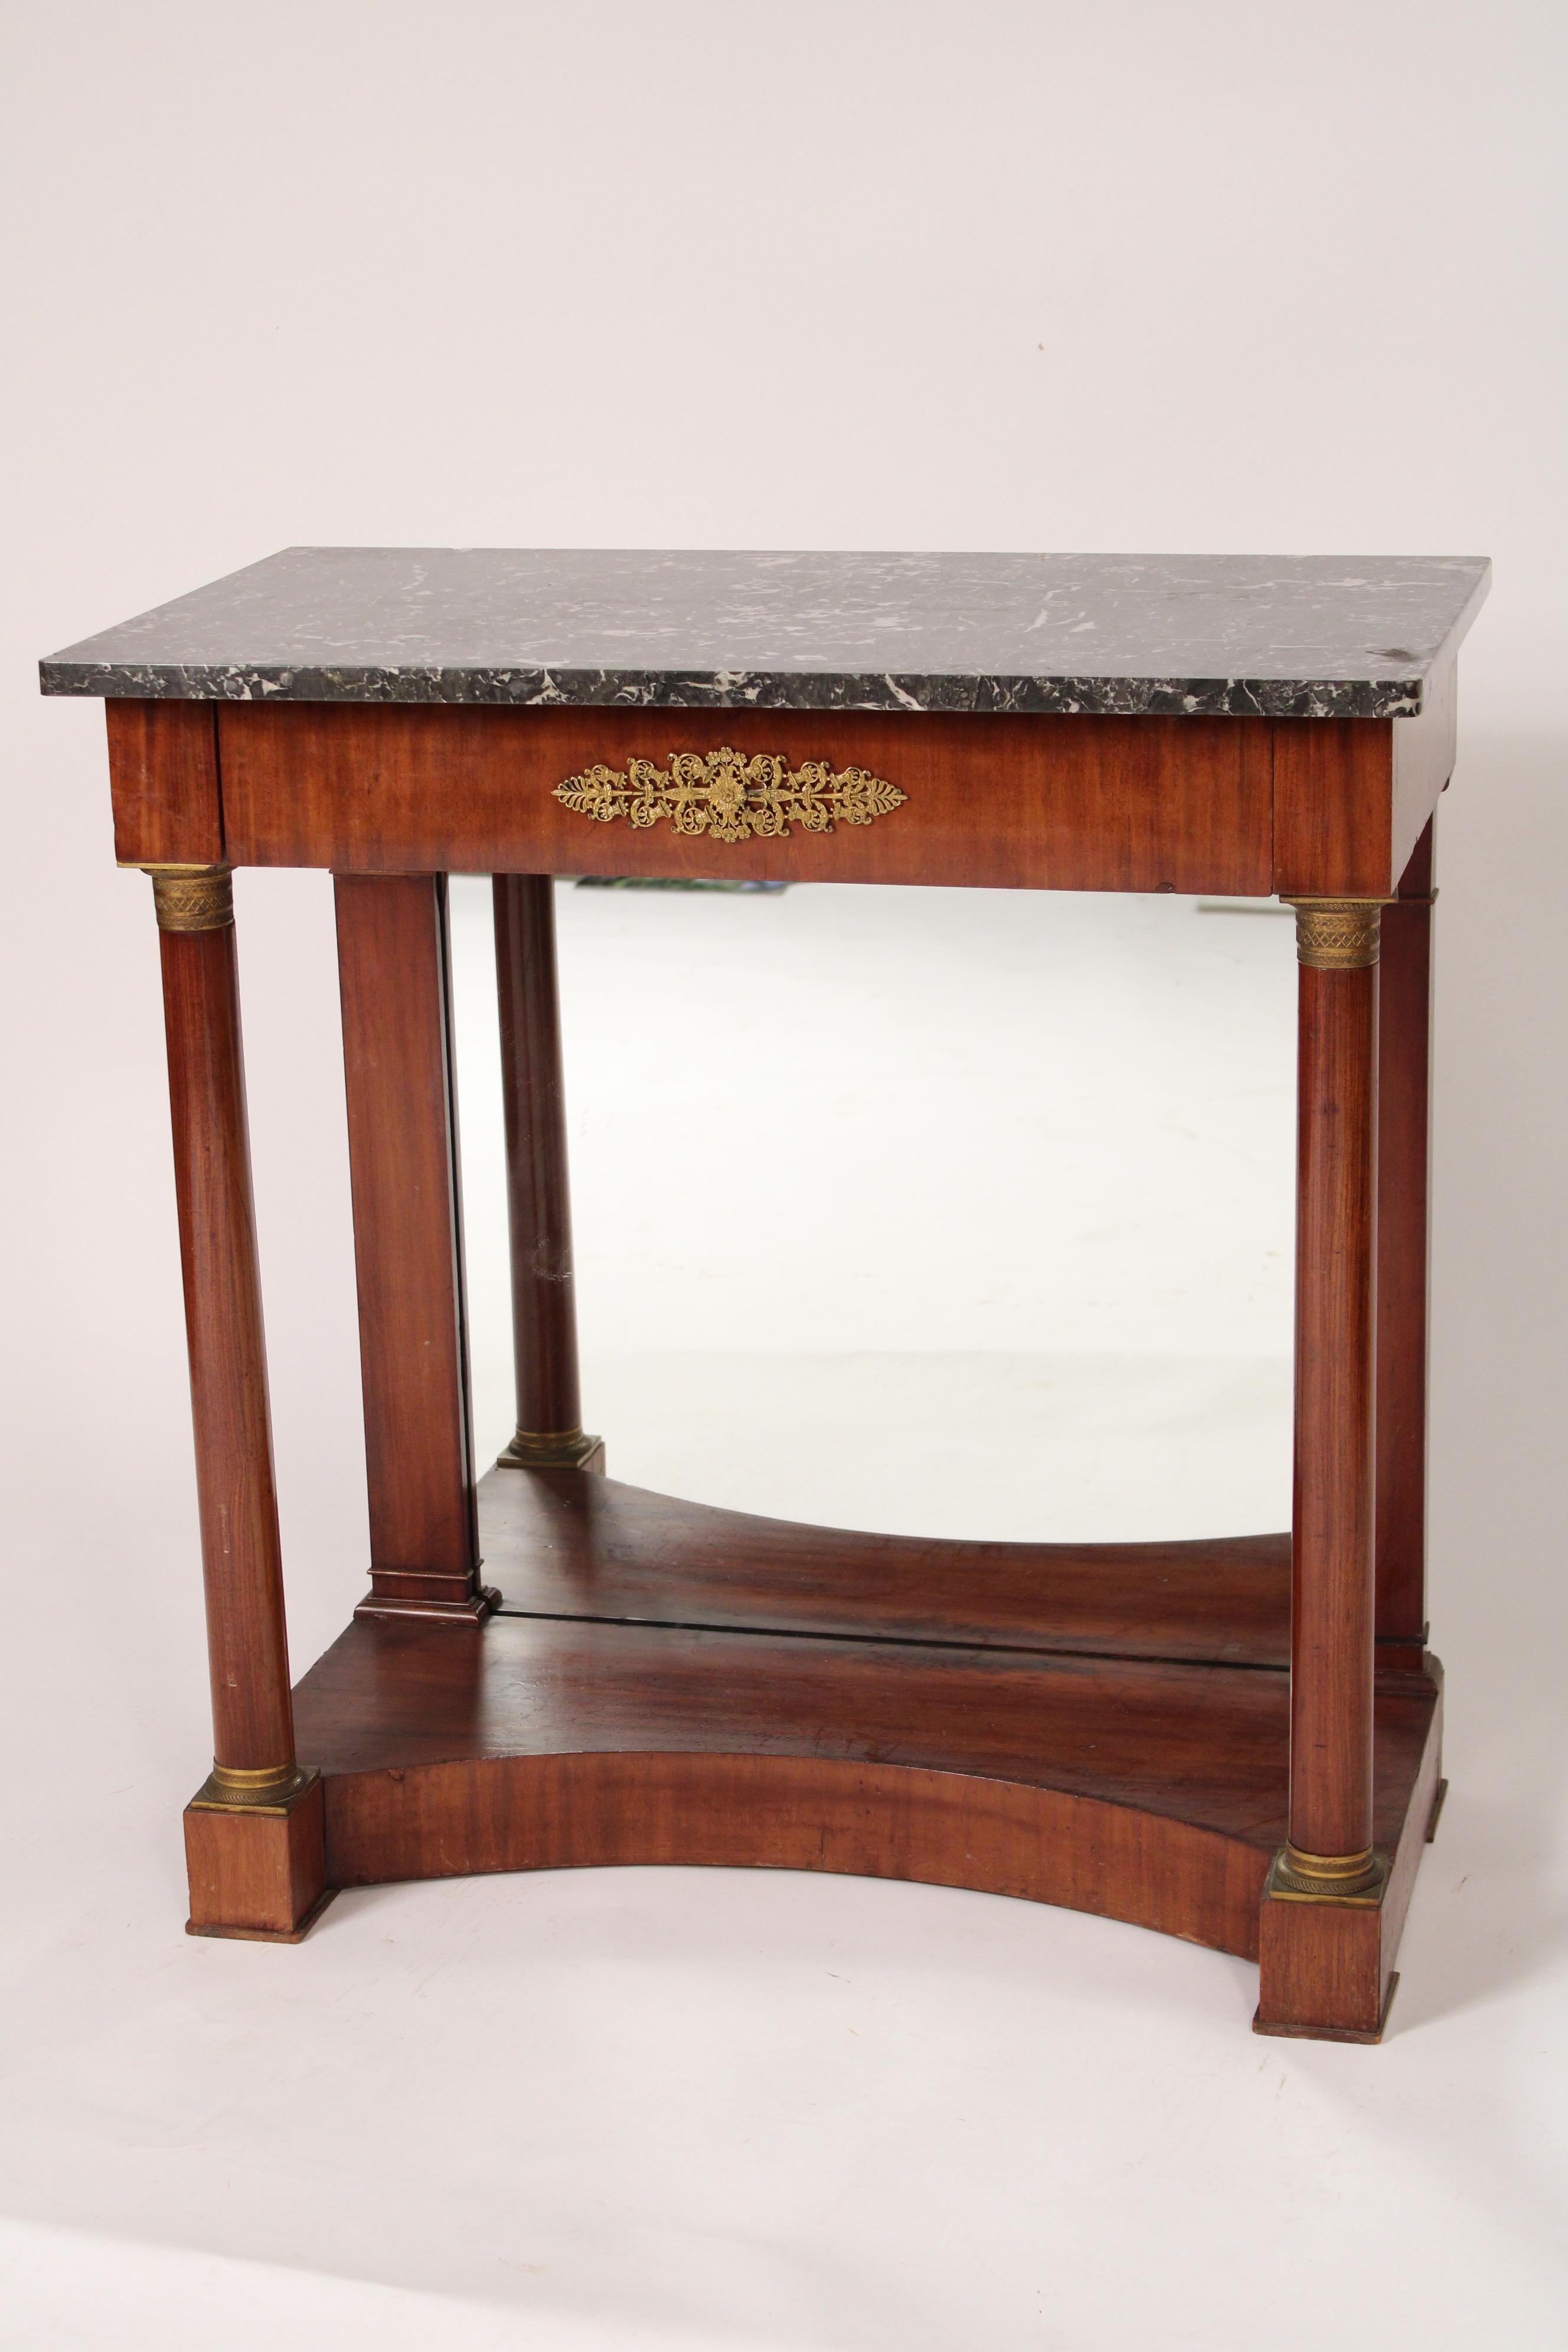 European Antique Empire Style Console Table For Sale